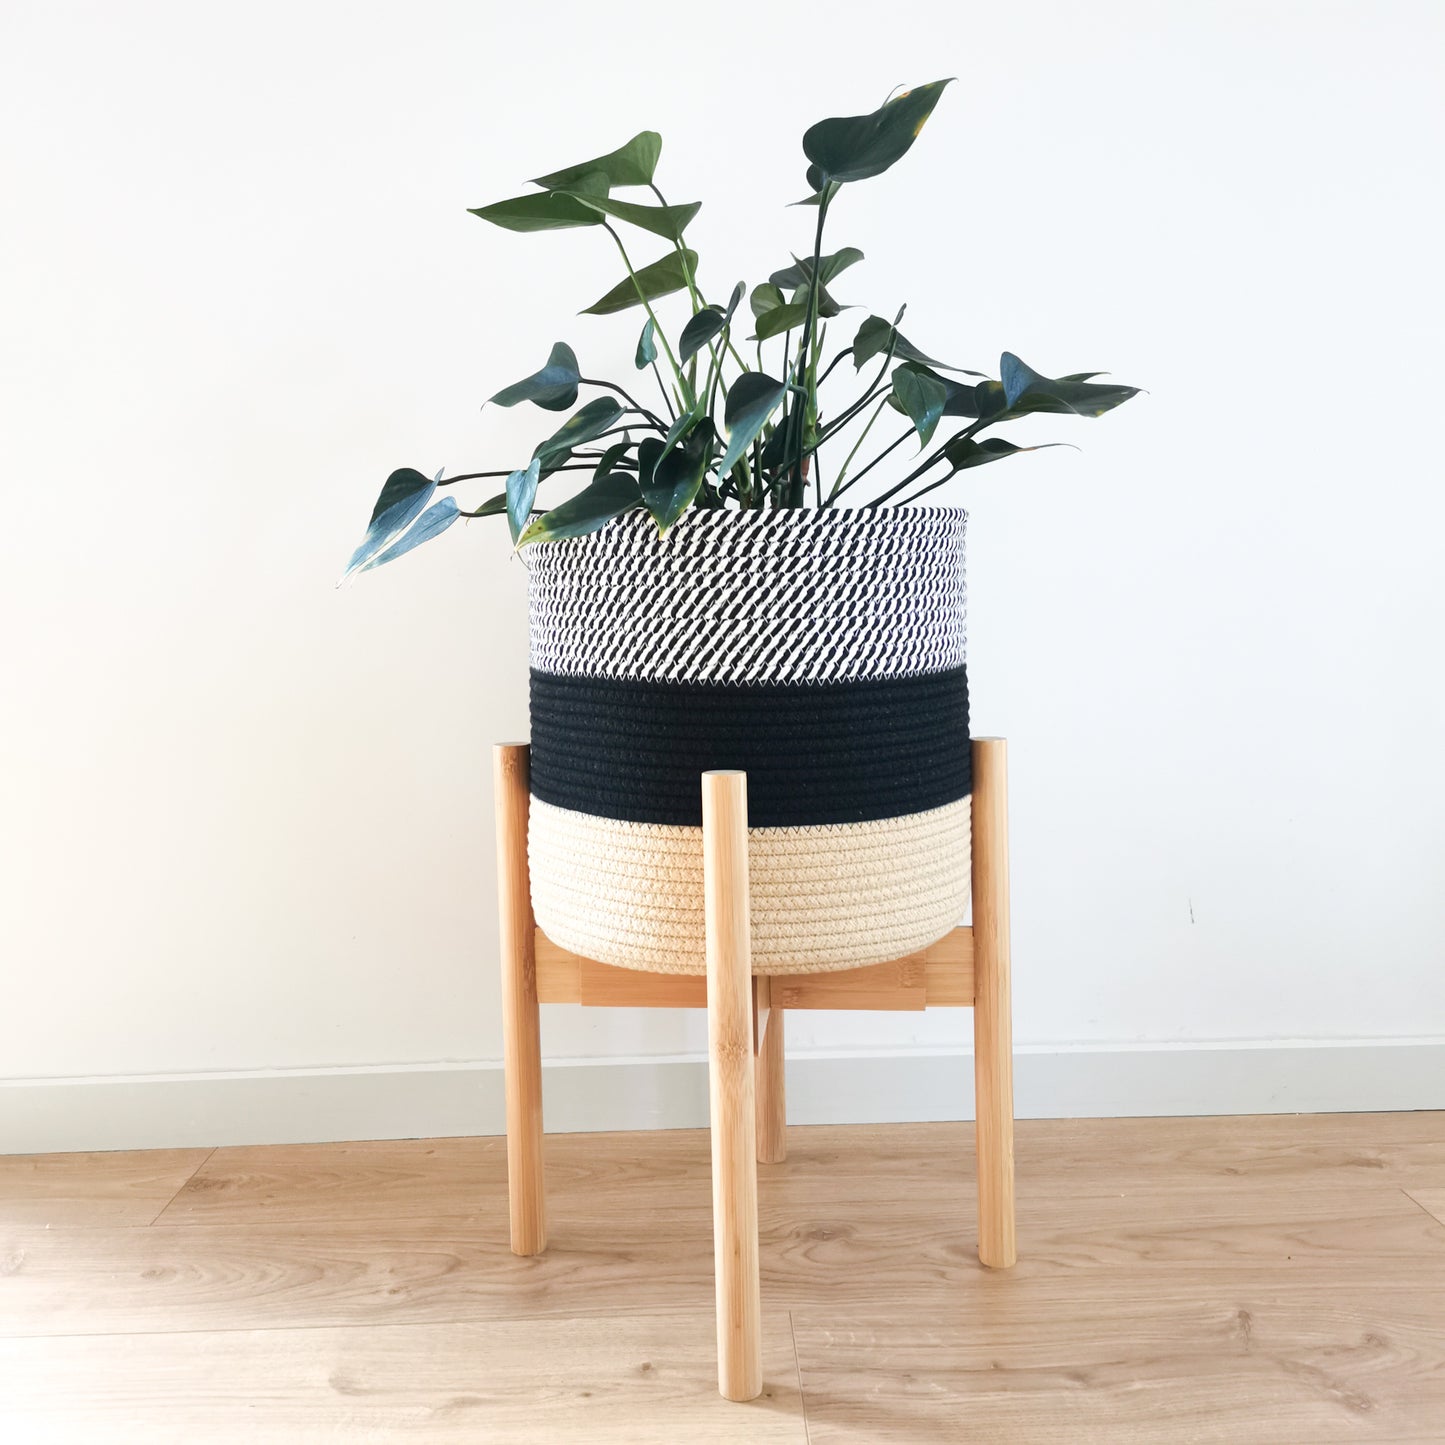 Our cotton basket is a beautiful way to complete any room. Made from 100% pure cotton rope, this eco-friendly basket features neutral tones like black, white, and beige. In addition, the woven pattern gives your space a unique natural texture.